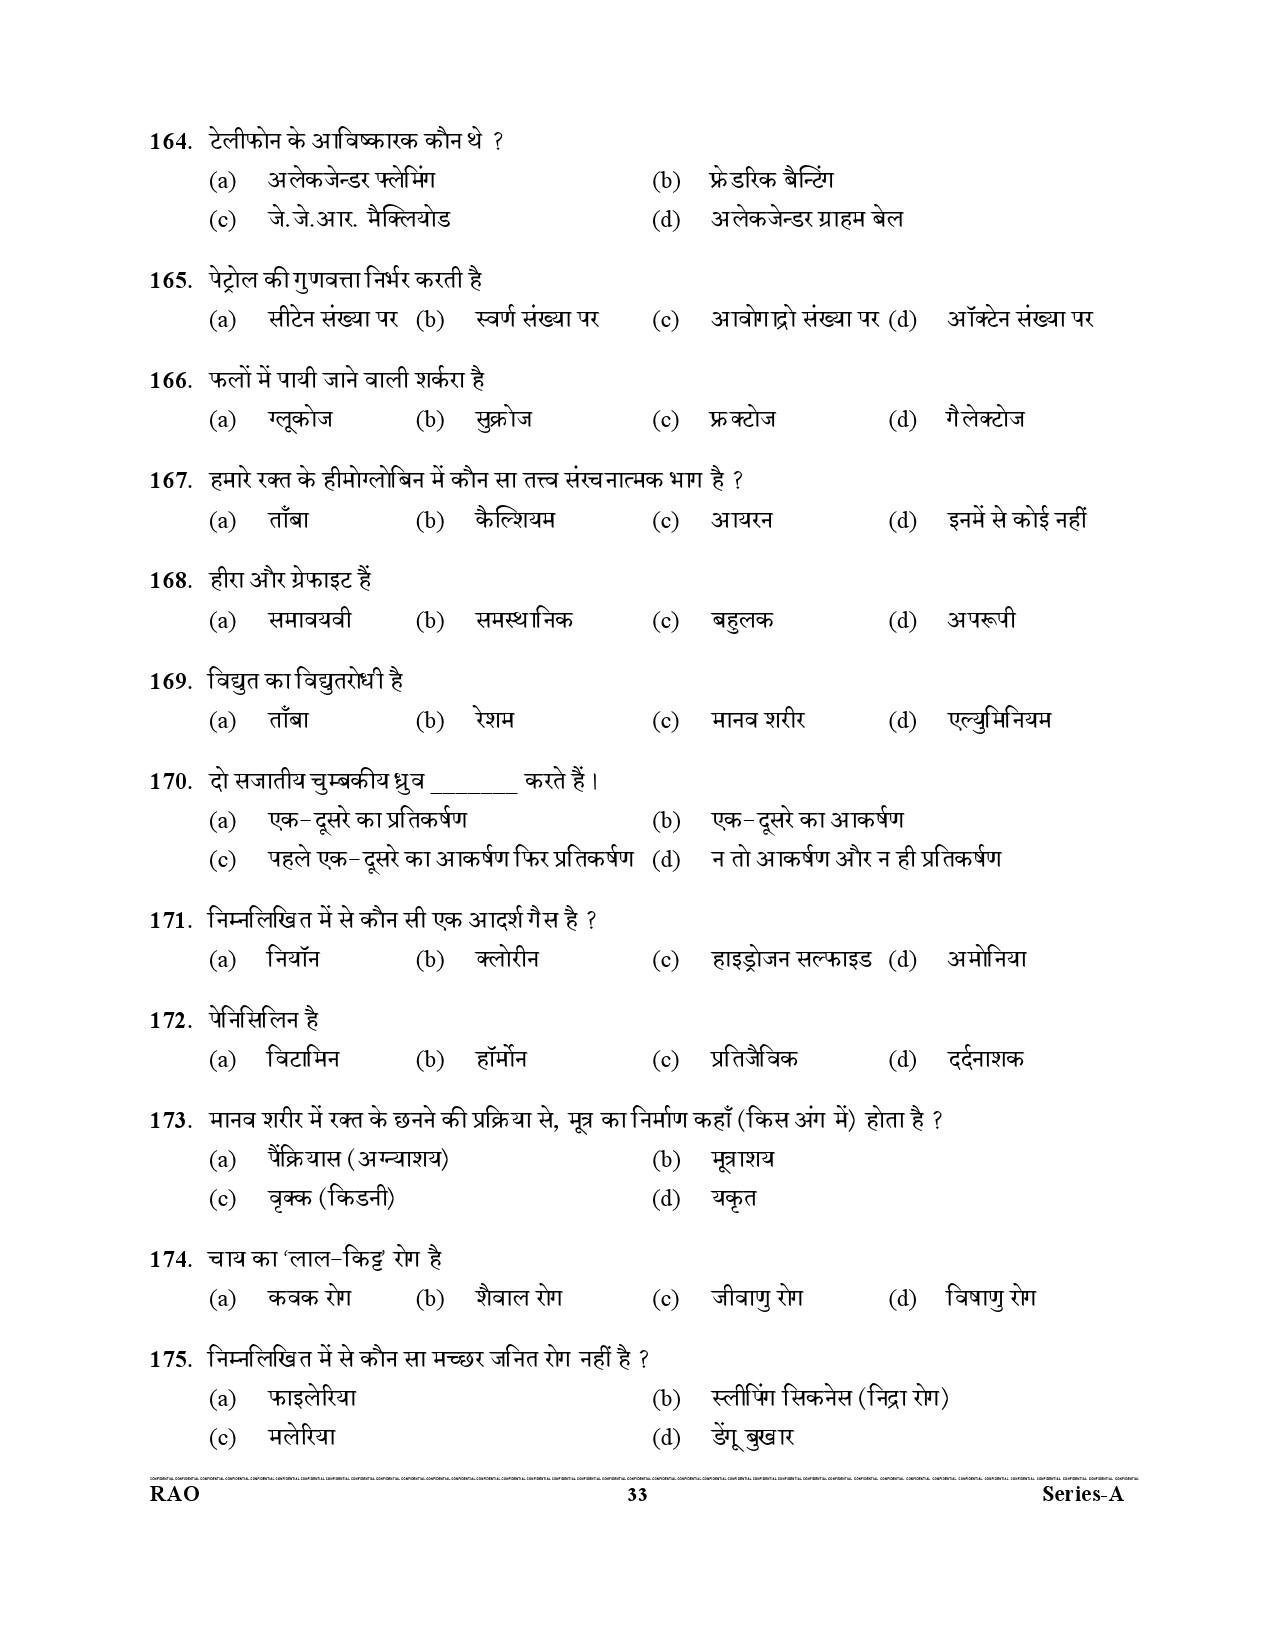 Advocate General Office Review Officer General Knowledge Preliminary 2021 33